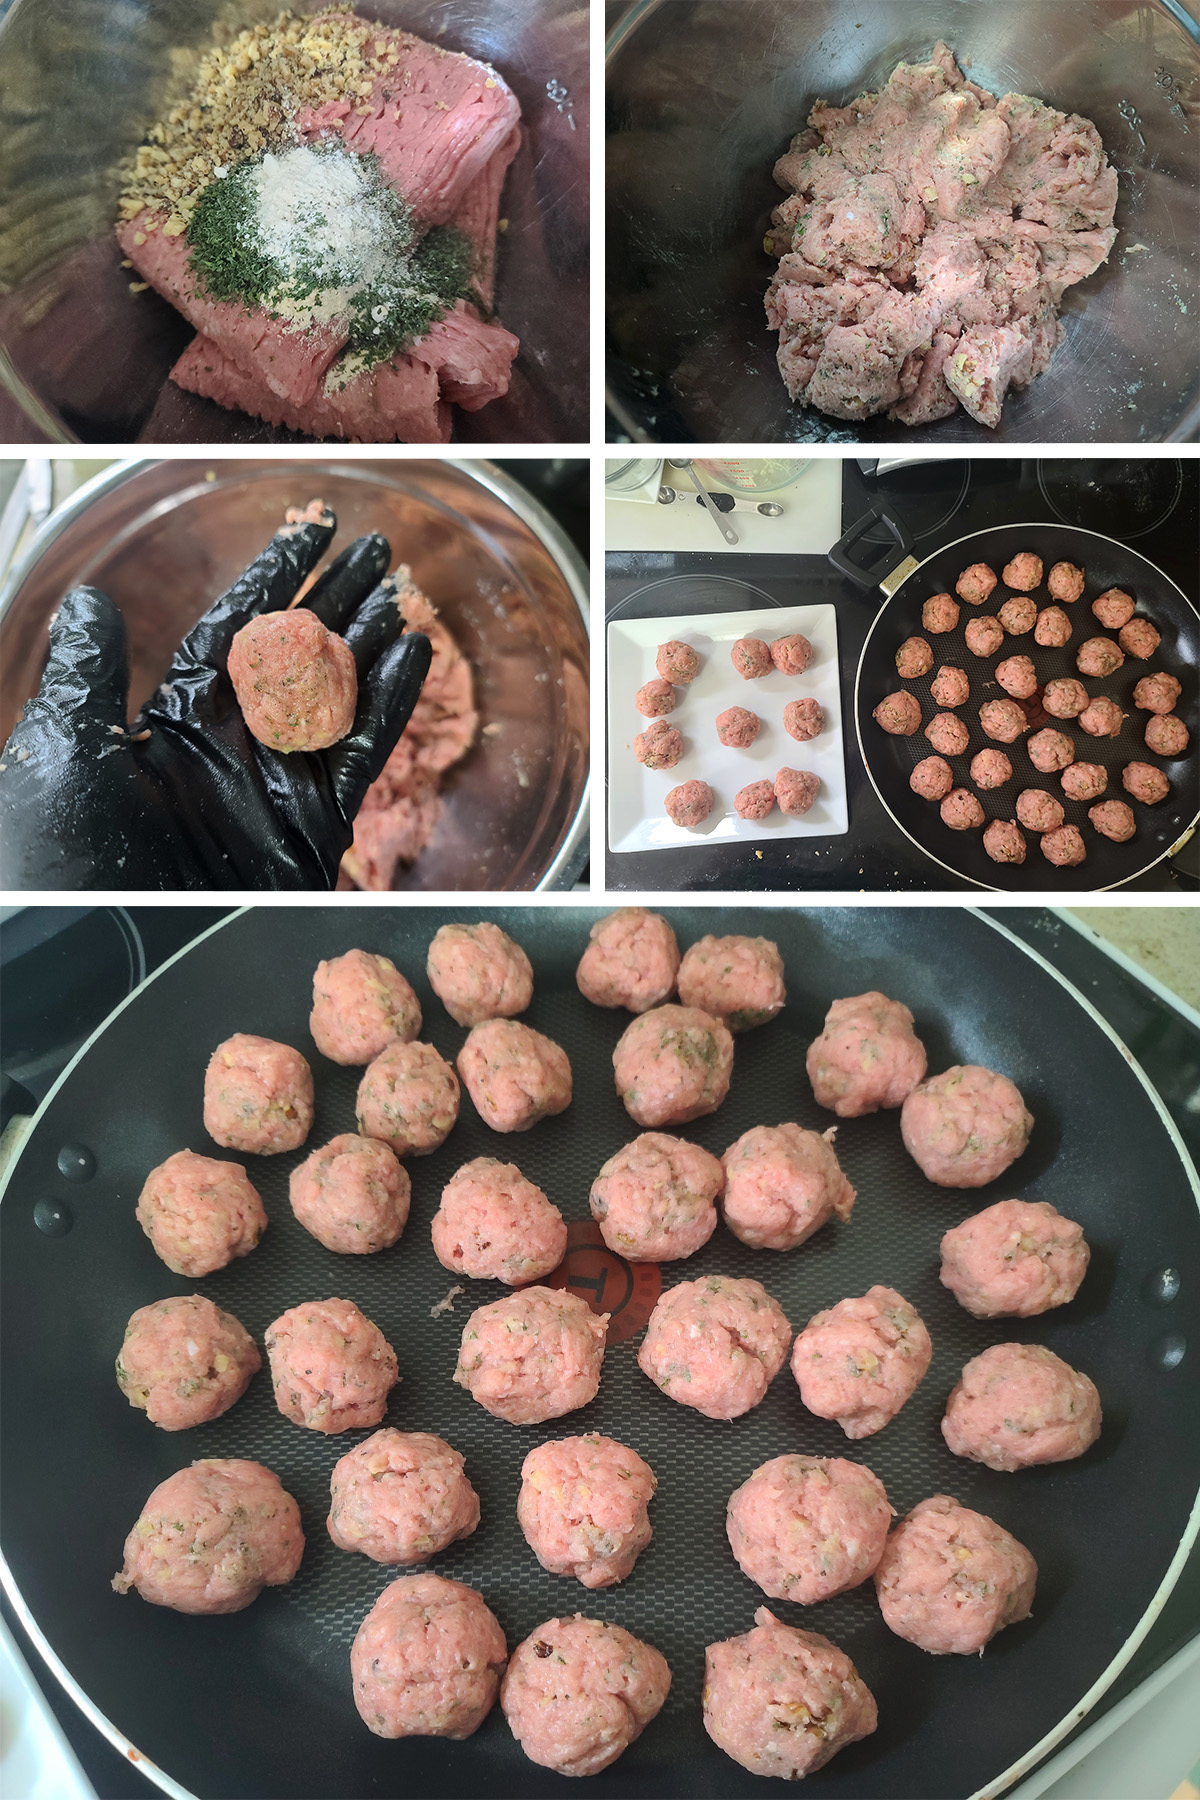 A 5 part image showing the meatballs being mixed, formed, and placed in a pan.